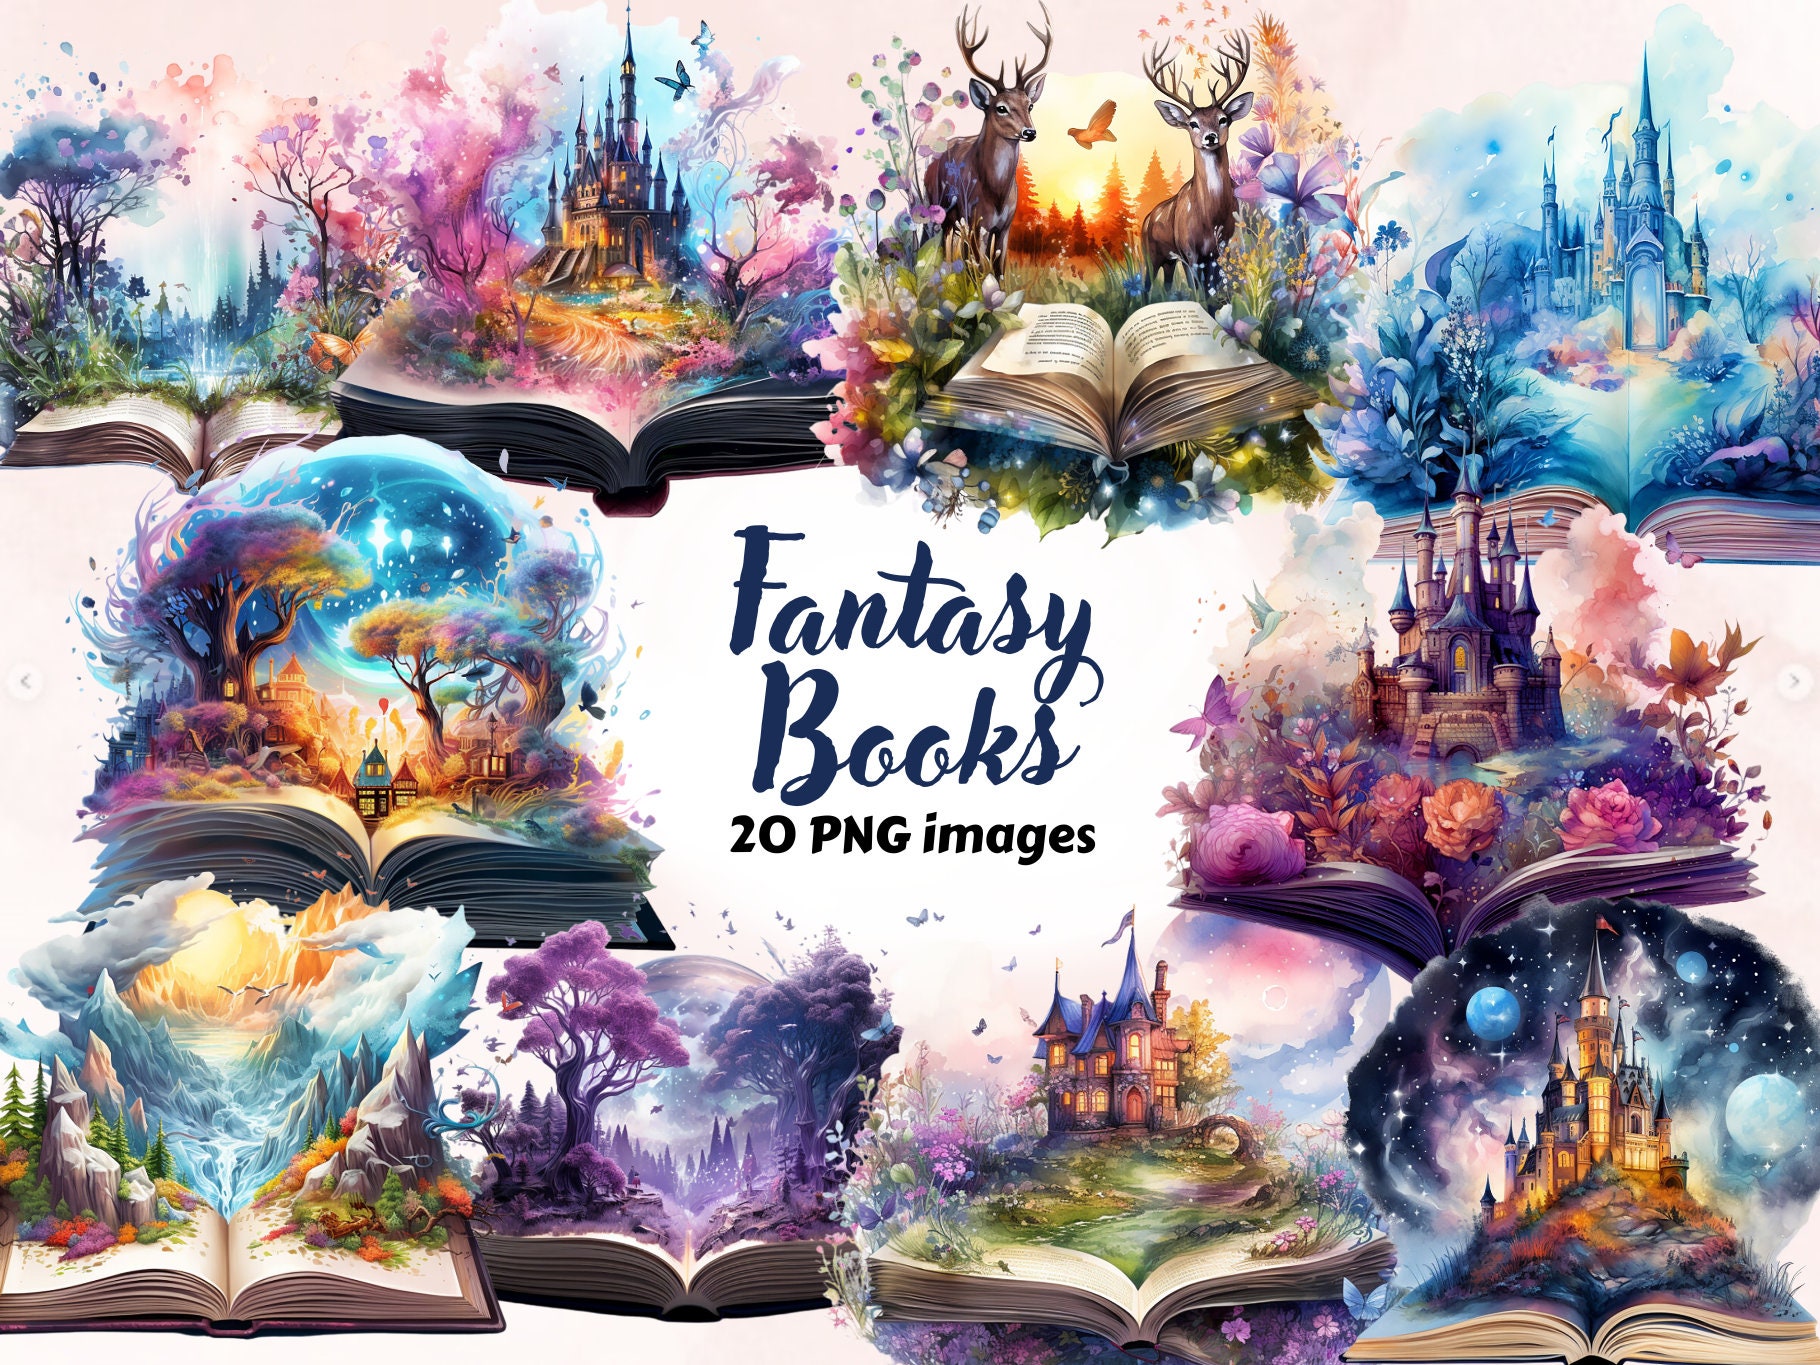 PNG Watercolor Fantasy Books Clipart, Open Book Clip Art, Book Bundle PNG,  vintage books stacklibrary clip art, old books, Magic Books